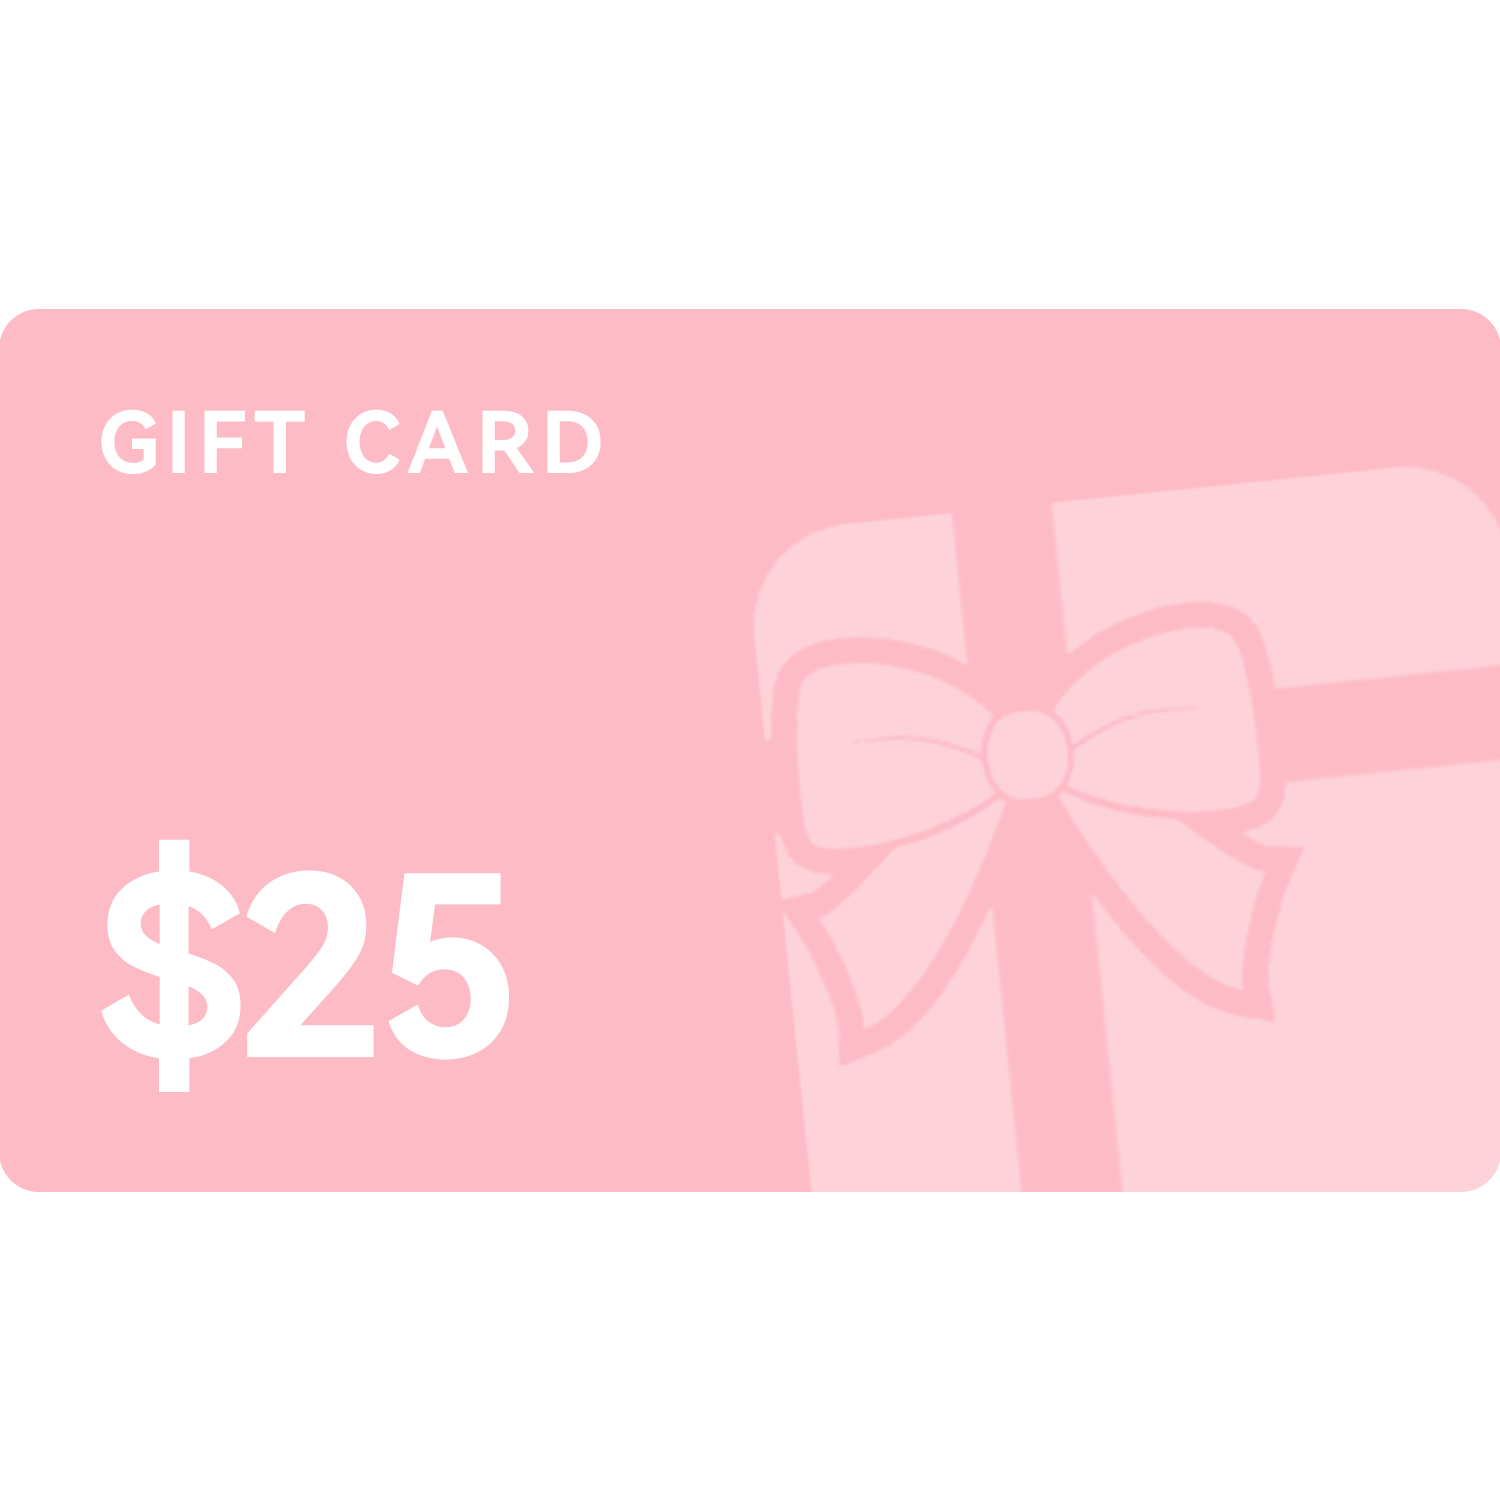 Arrtx Gift Cards from $10- $300 for Online Art Supplies Shopping